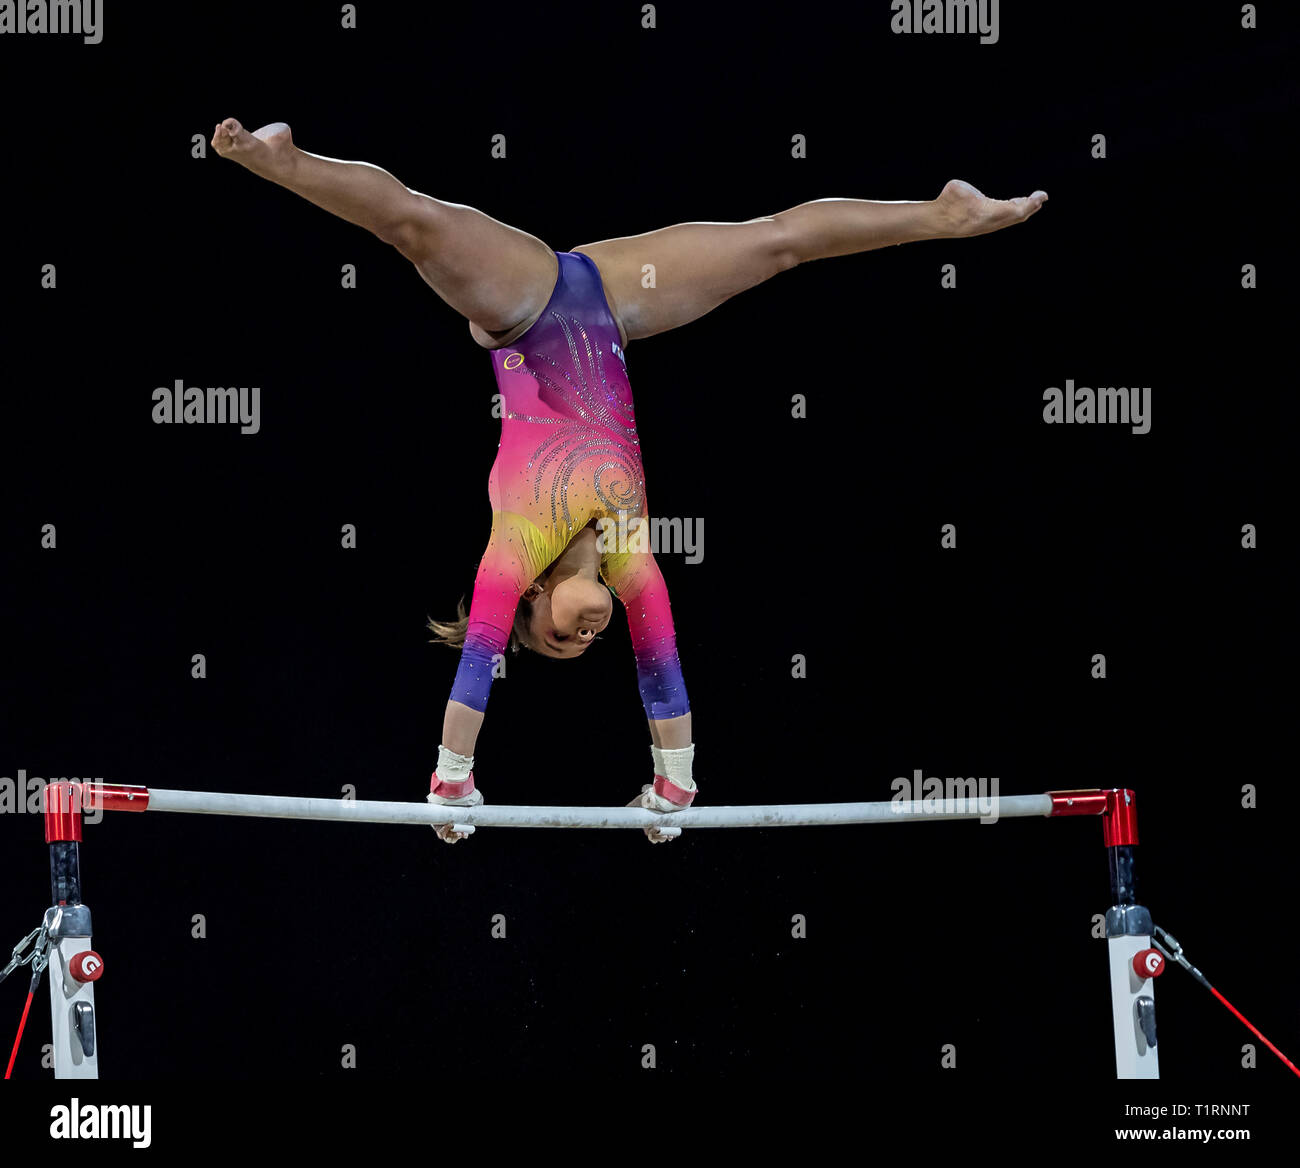 22.03.2019. Resorts World Arena, Birmingham, England. The Gymnastics World Cup 2019 THAIS FIDELISN (BRA) during the Womens uneven bars with a score of Stock Photo